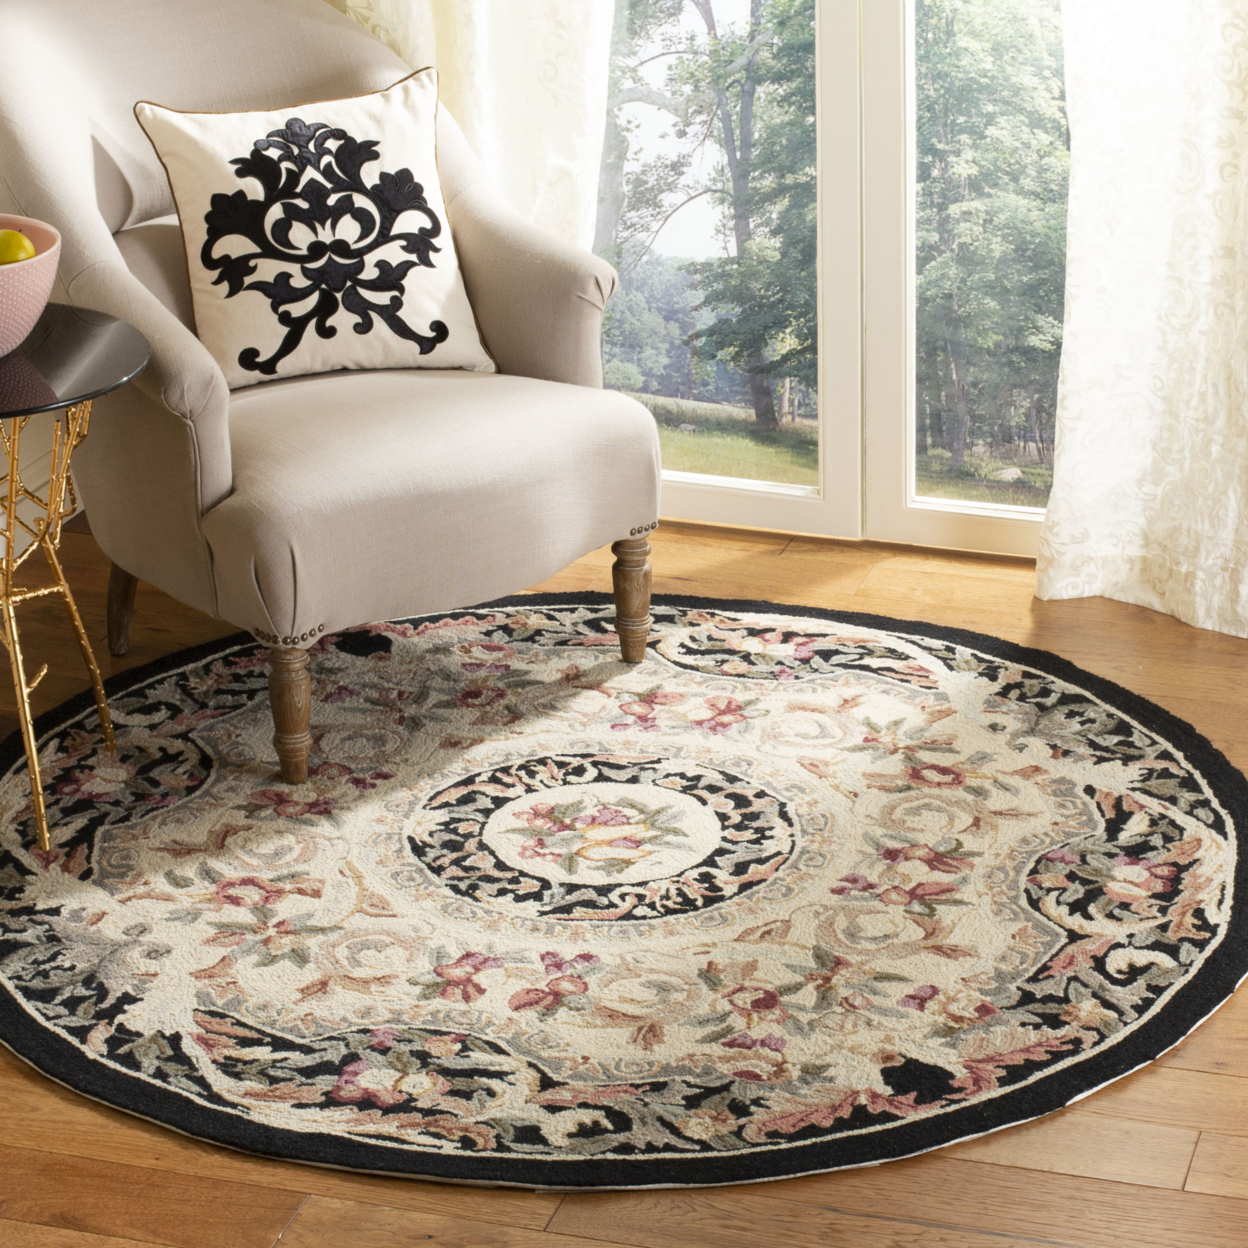 SAFAVIEH Chelsea Collection HK80A Hand-hooked Black Rug - 3' Round